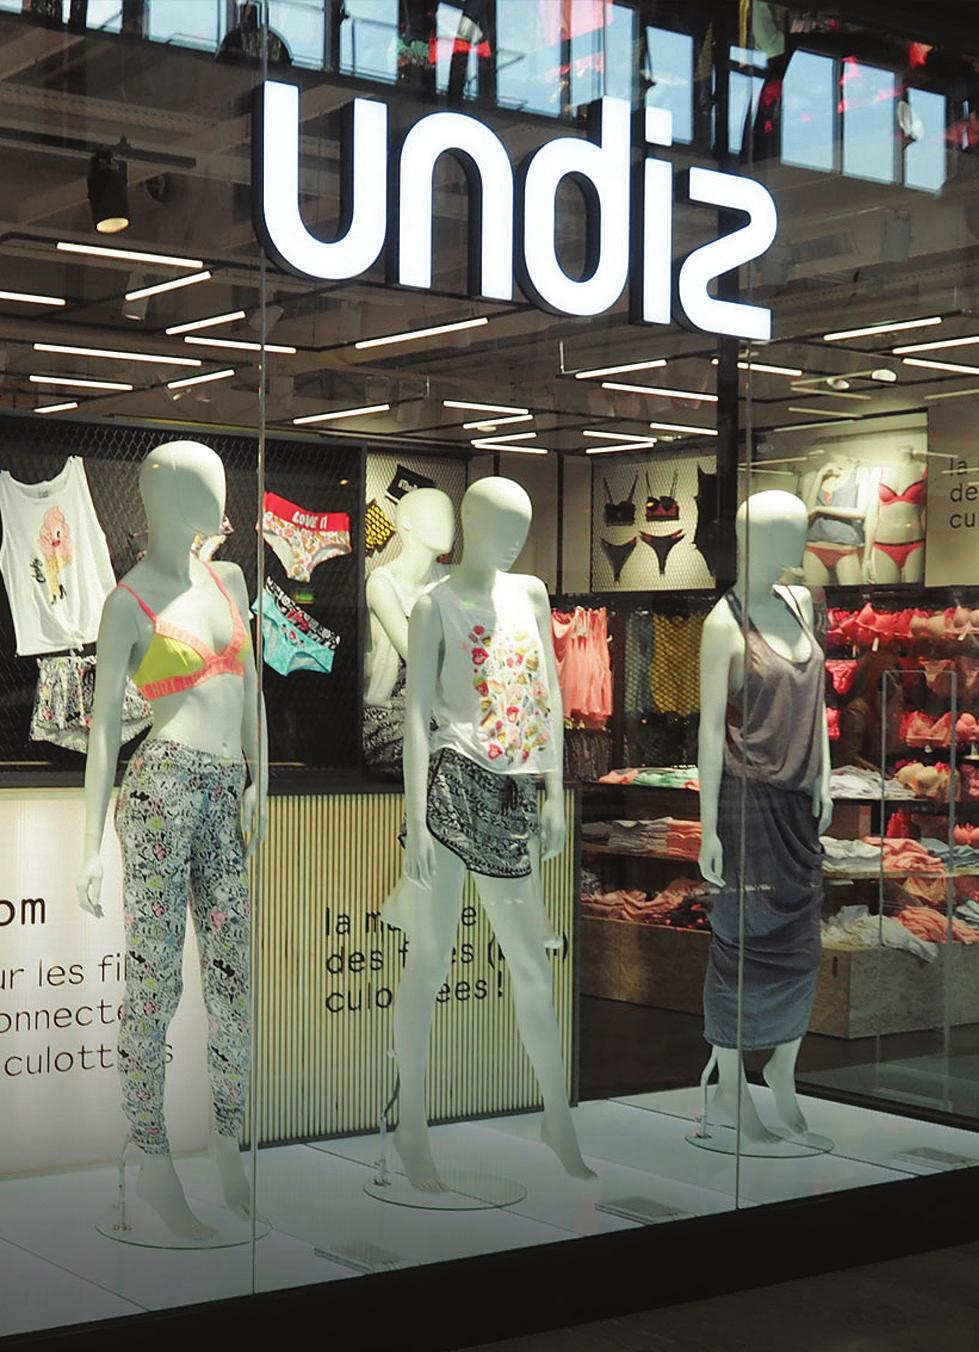 5 hours) Real-time inventory updates at time of sale Restocking alerts when items are sold Undiz Undiz uses an innovative RAIN RFID-based retail management solution that breaks down the barriers